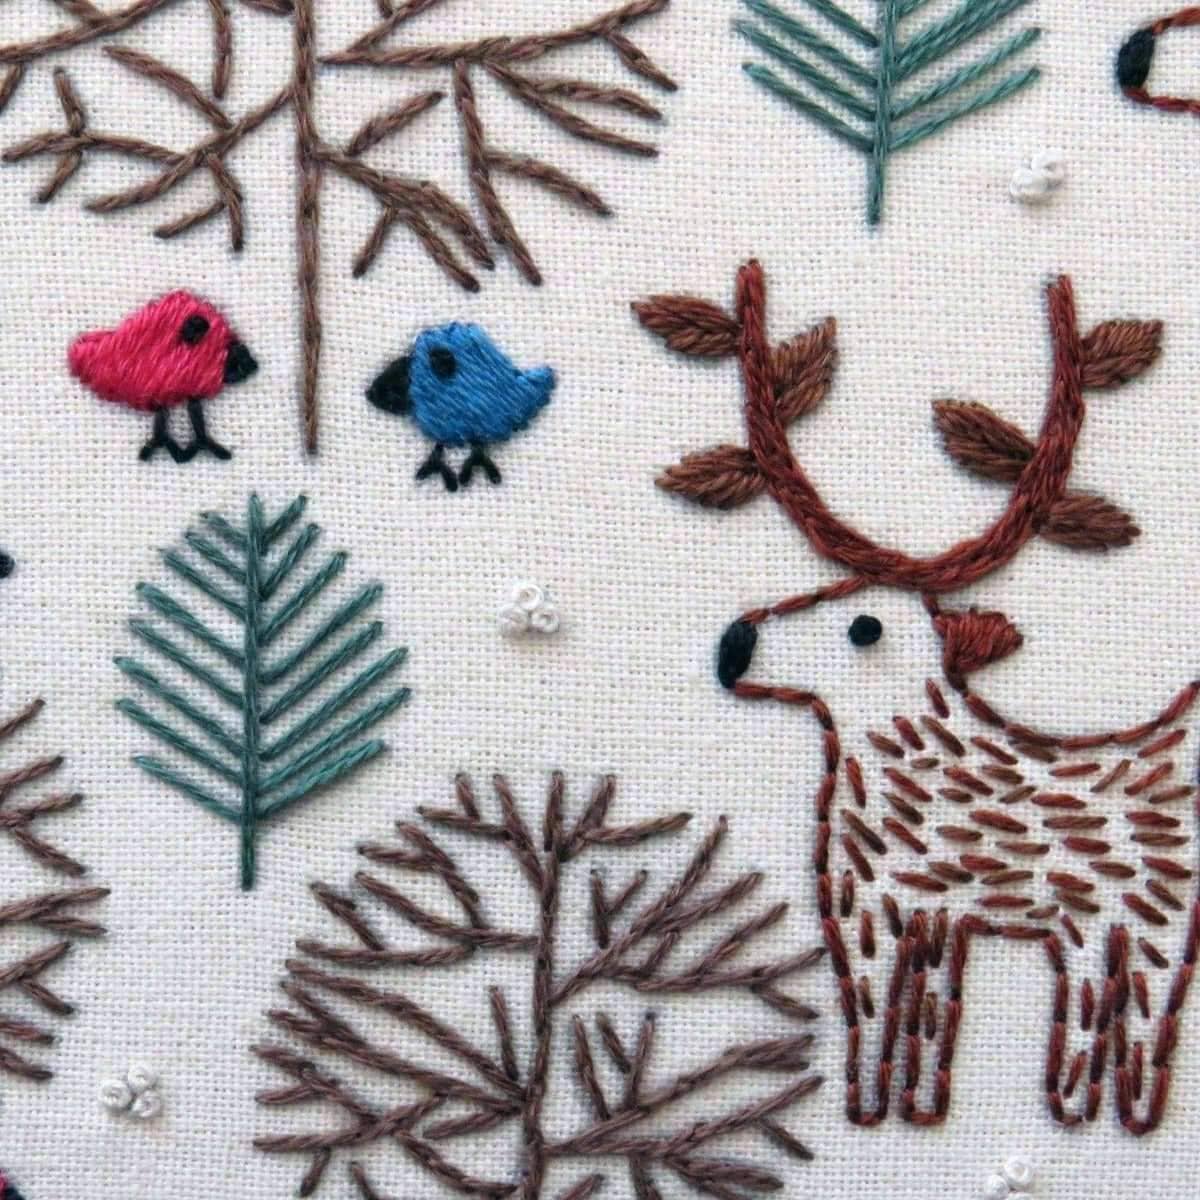 Merry Moose Christmas Hand Embroidery Pattern , PDF Download , StitchDoodles , christmas, embroidery hoop kit, embroidery kit for adults, embroidery kit for beginers, embroidery kits for beginners, embroidery pattern, hand embroidery, PDF pattern , StitchDoodles , shop.stitchdoodles.com